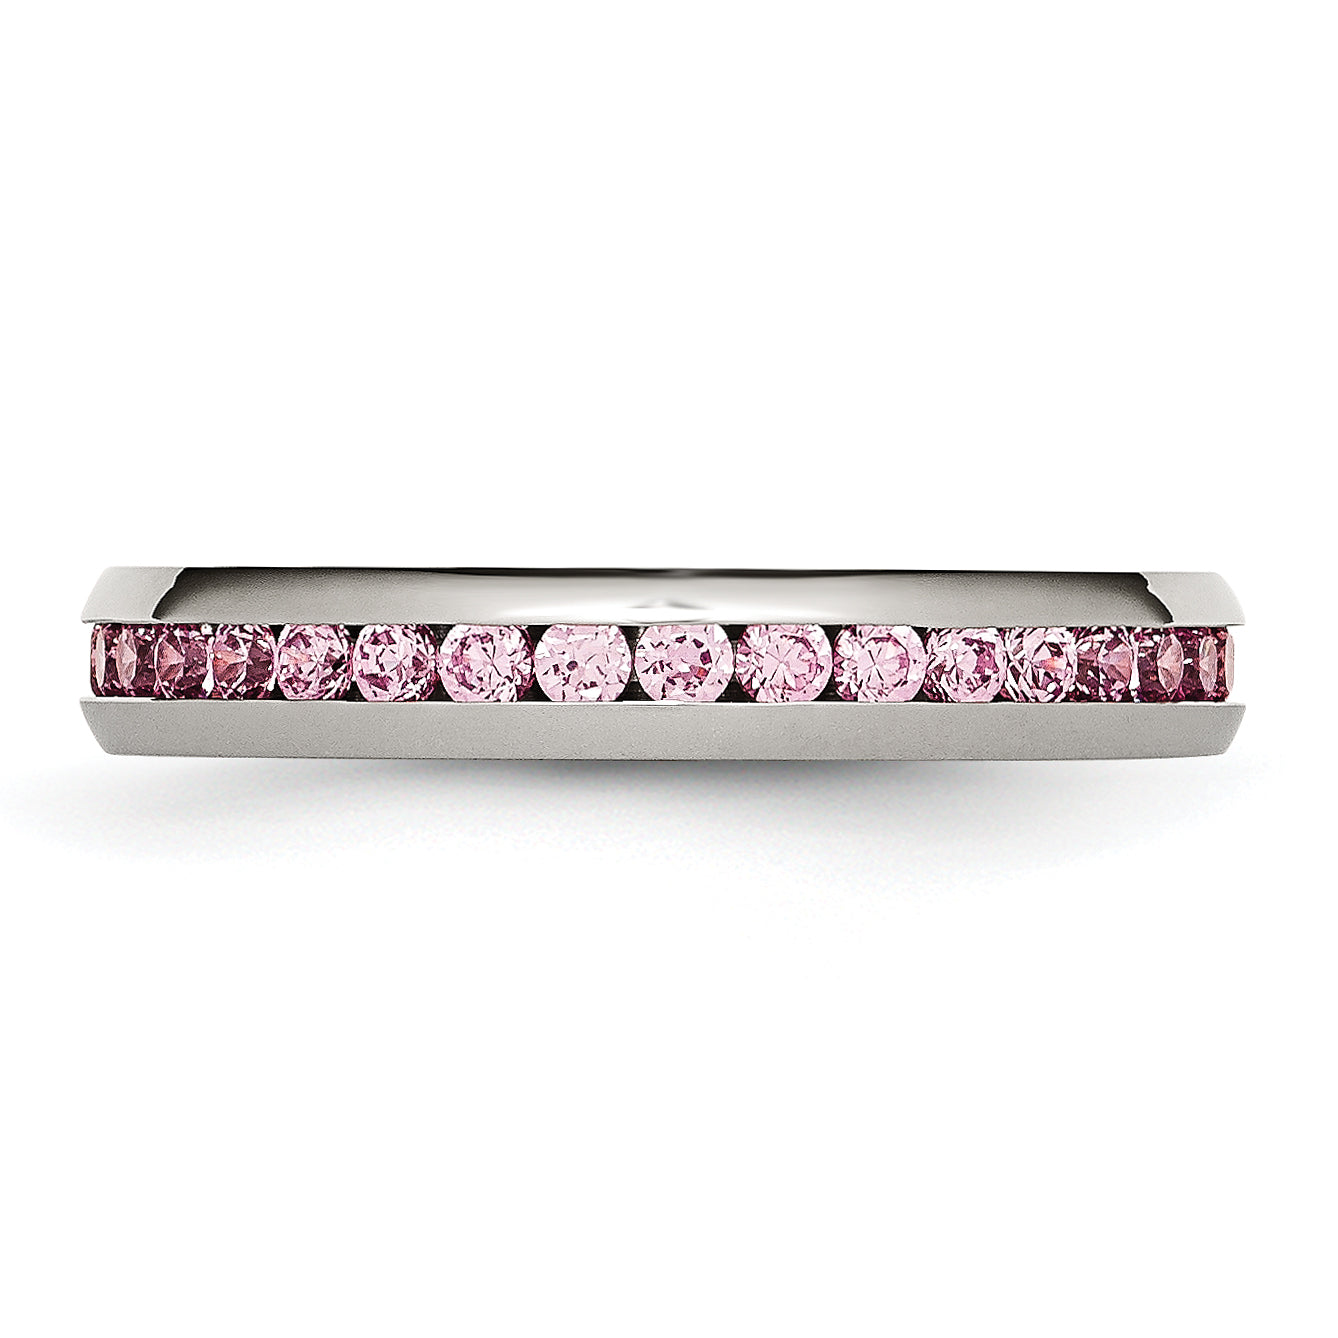 Stainless Steel Polished 4mm October Pink CZ Ring